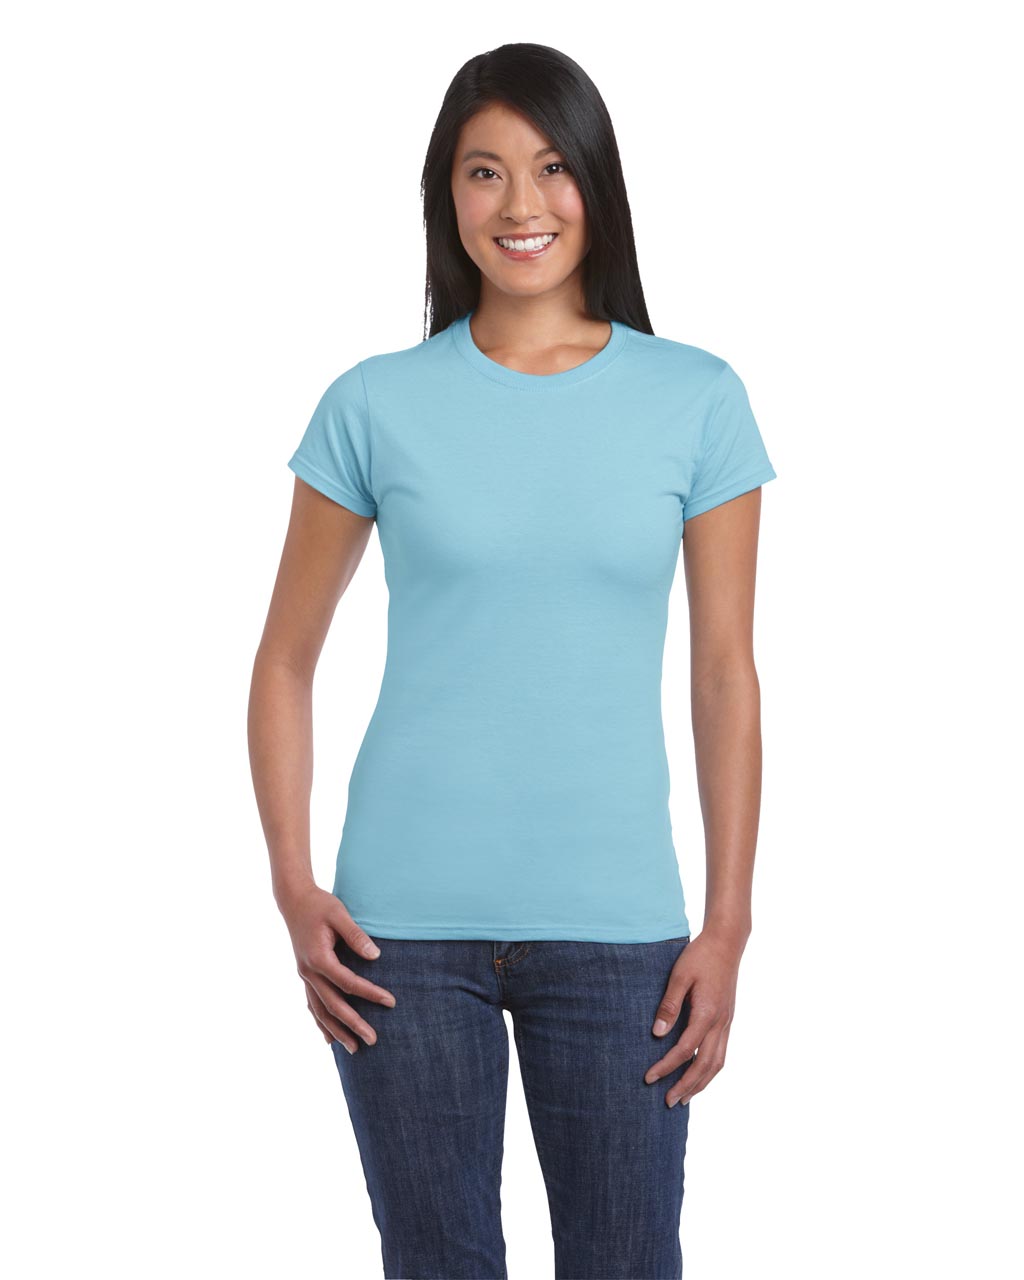 SOFTSTYLE<SUP>®</SUP> LADIES' T-SHIRT